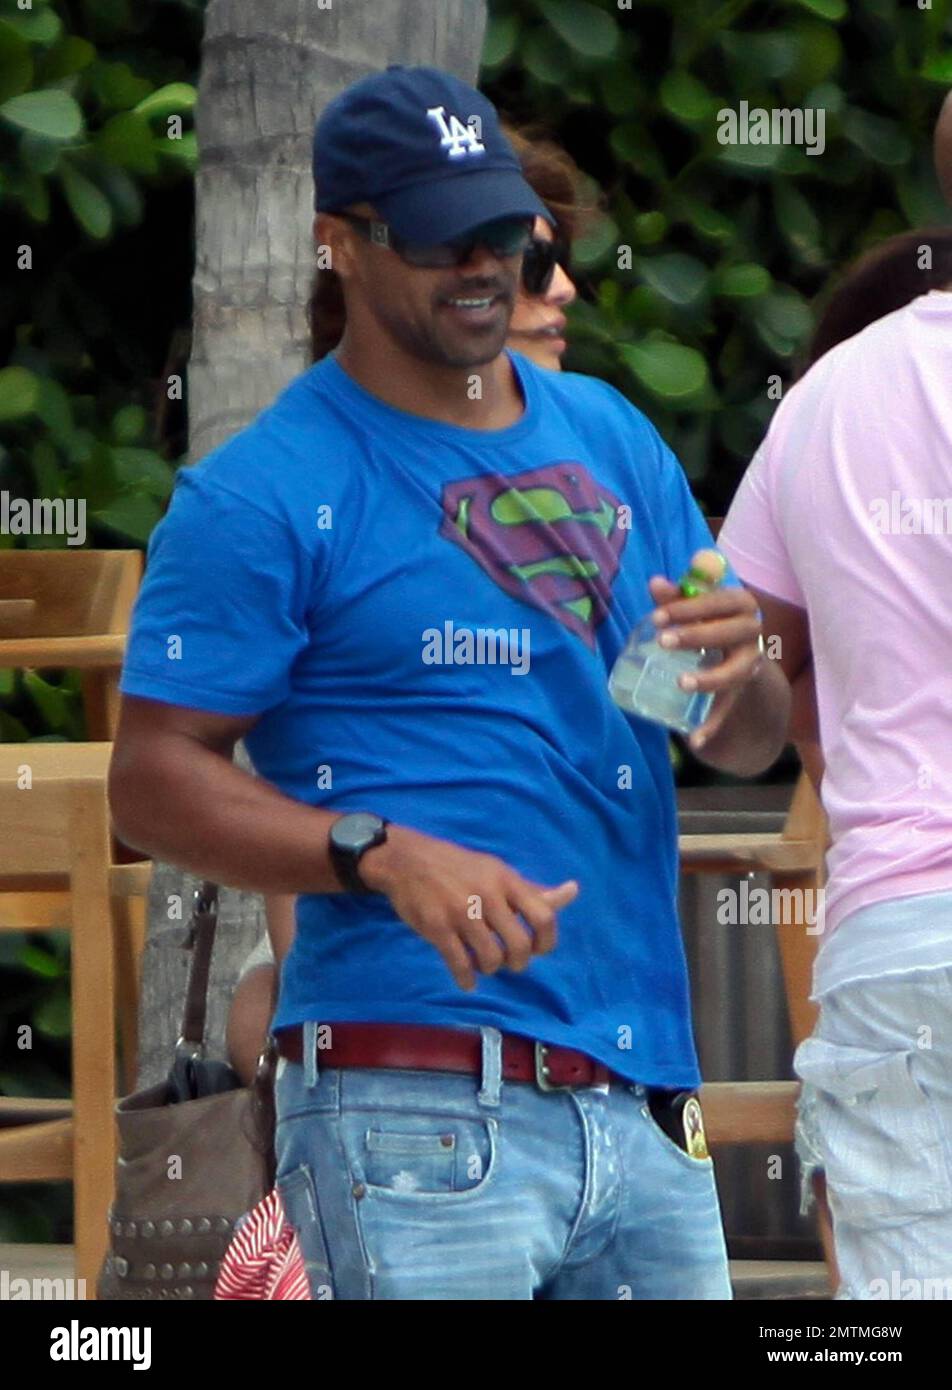 Actor Shemar Moore wears a Superman t shirt during a stroll on the beach.  Moore carried along a bottle of spray tanning oil in his pocket and had  what looked to be